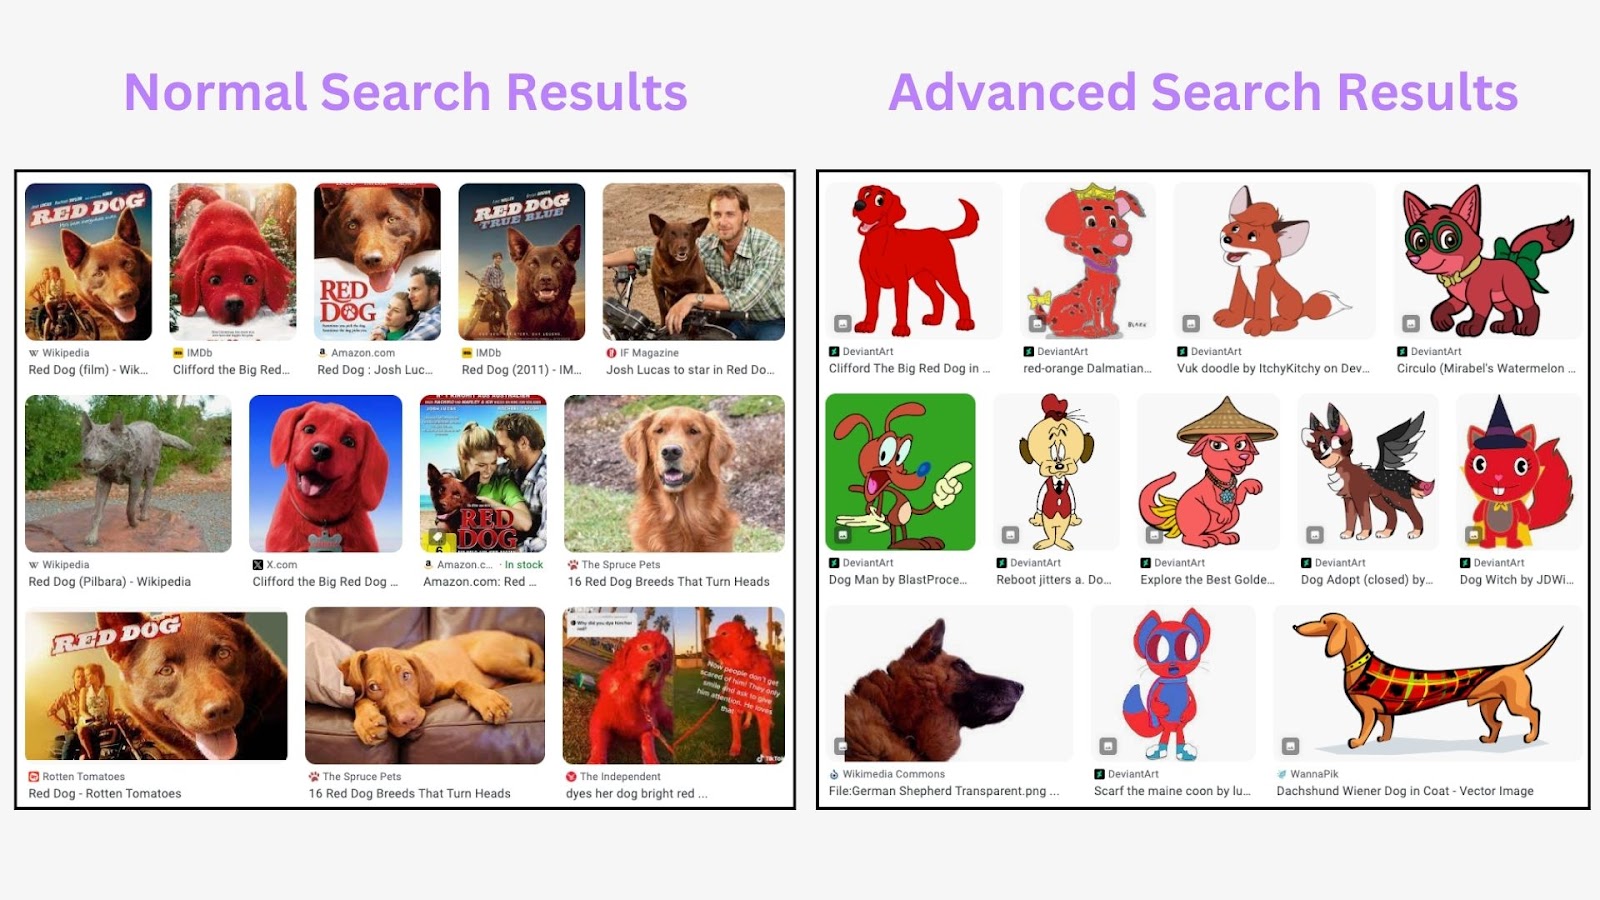 Normal (left) and advanced (right) Google image search results for “shopping statistics"